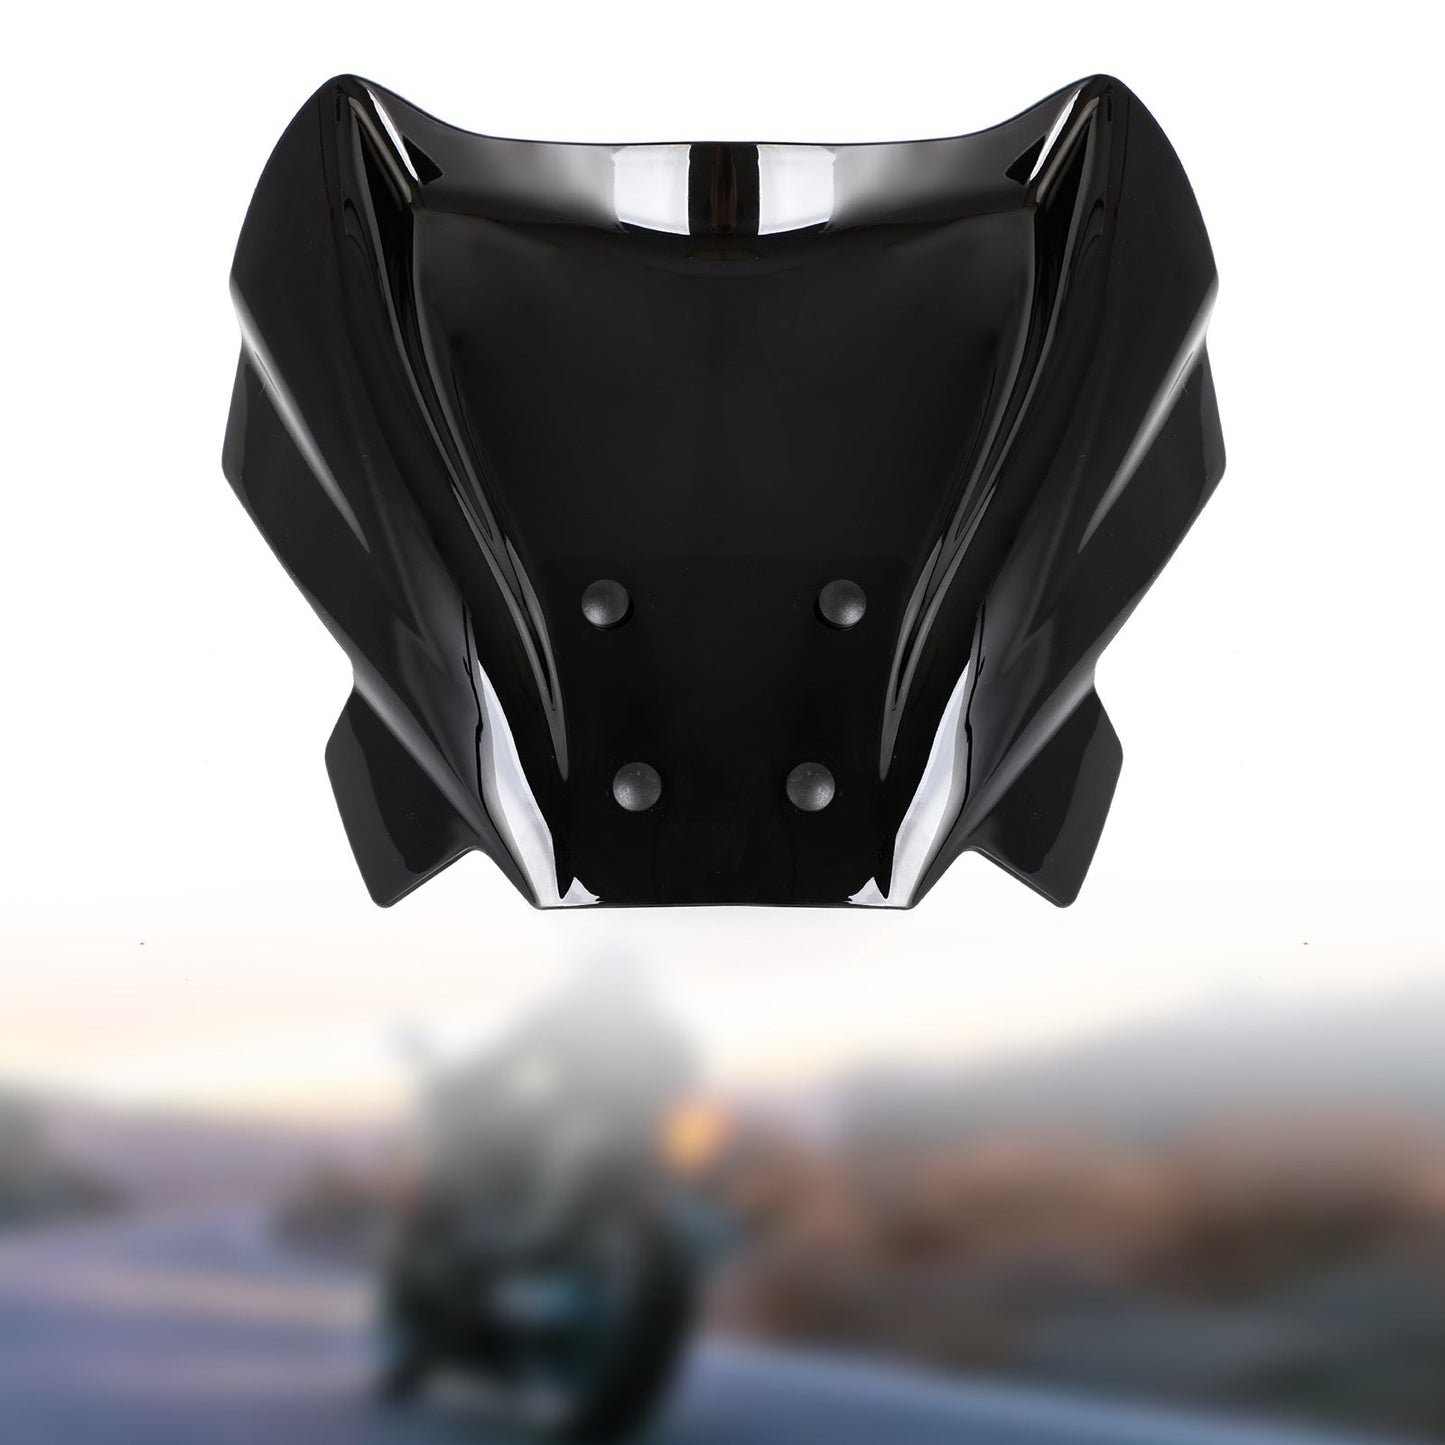 ABS Motorcycle Windshield WindScreen fit for Yamaha MT-09 / MT-09 SP 2021-2022